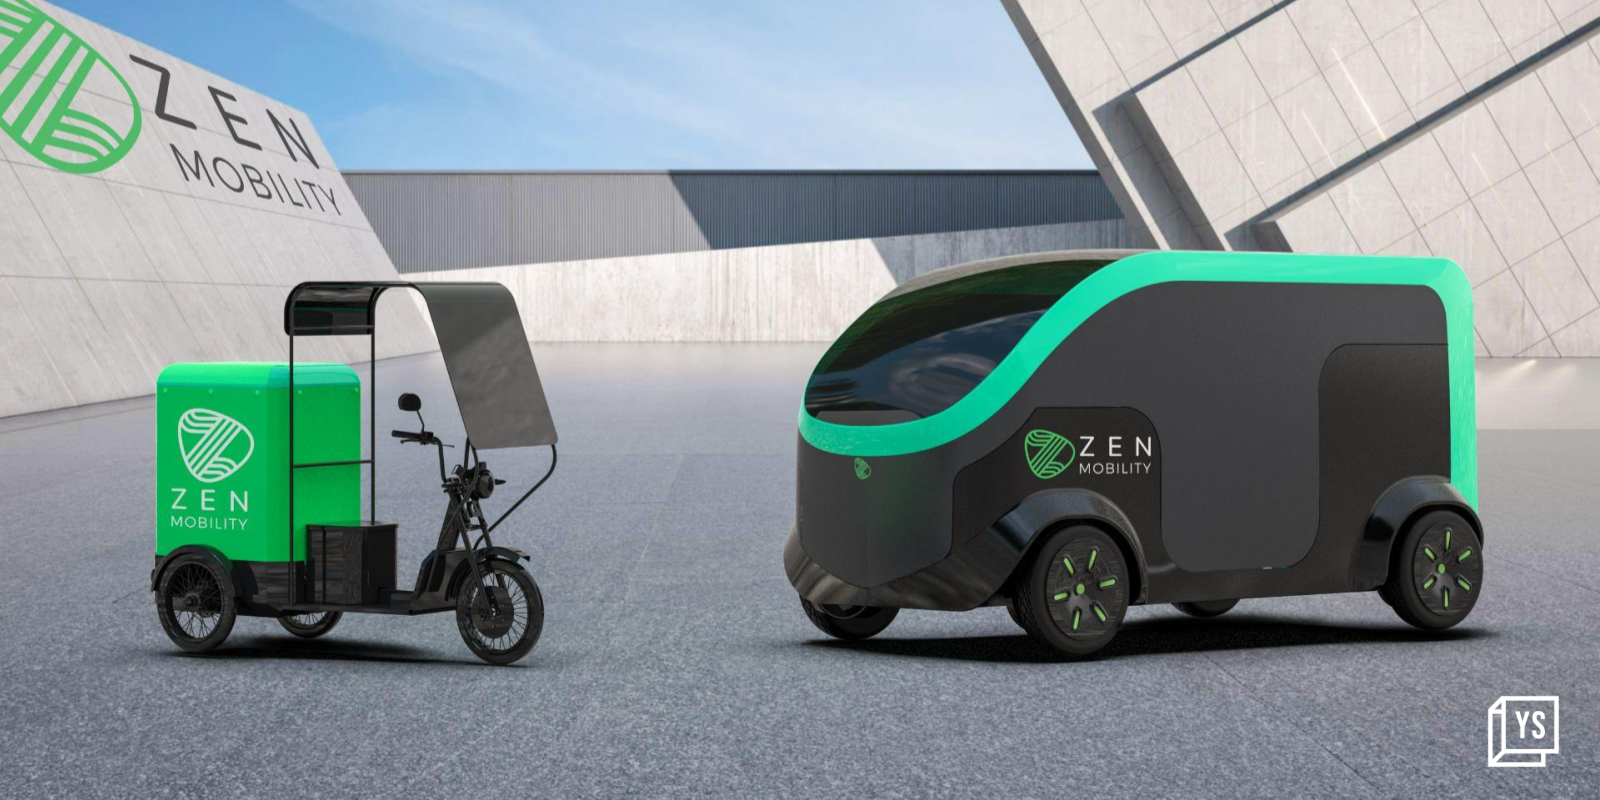 Neither a 2-wheeler nor a 3-wheeler: This commercial EV maker’s delivery scooter is in between